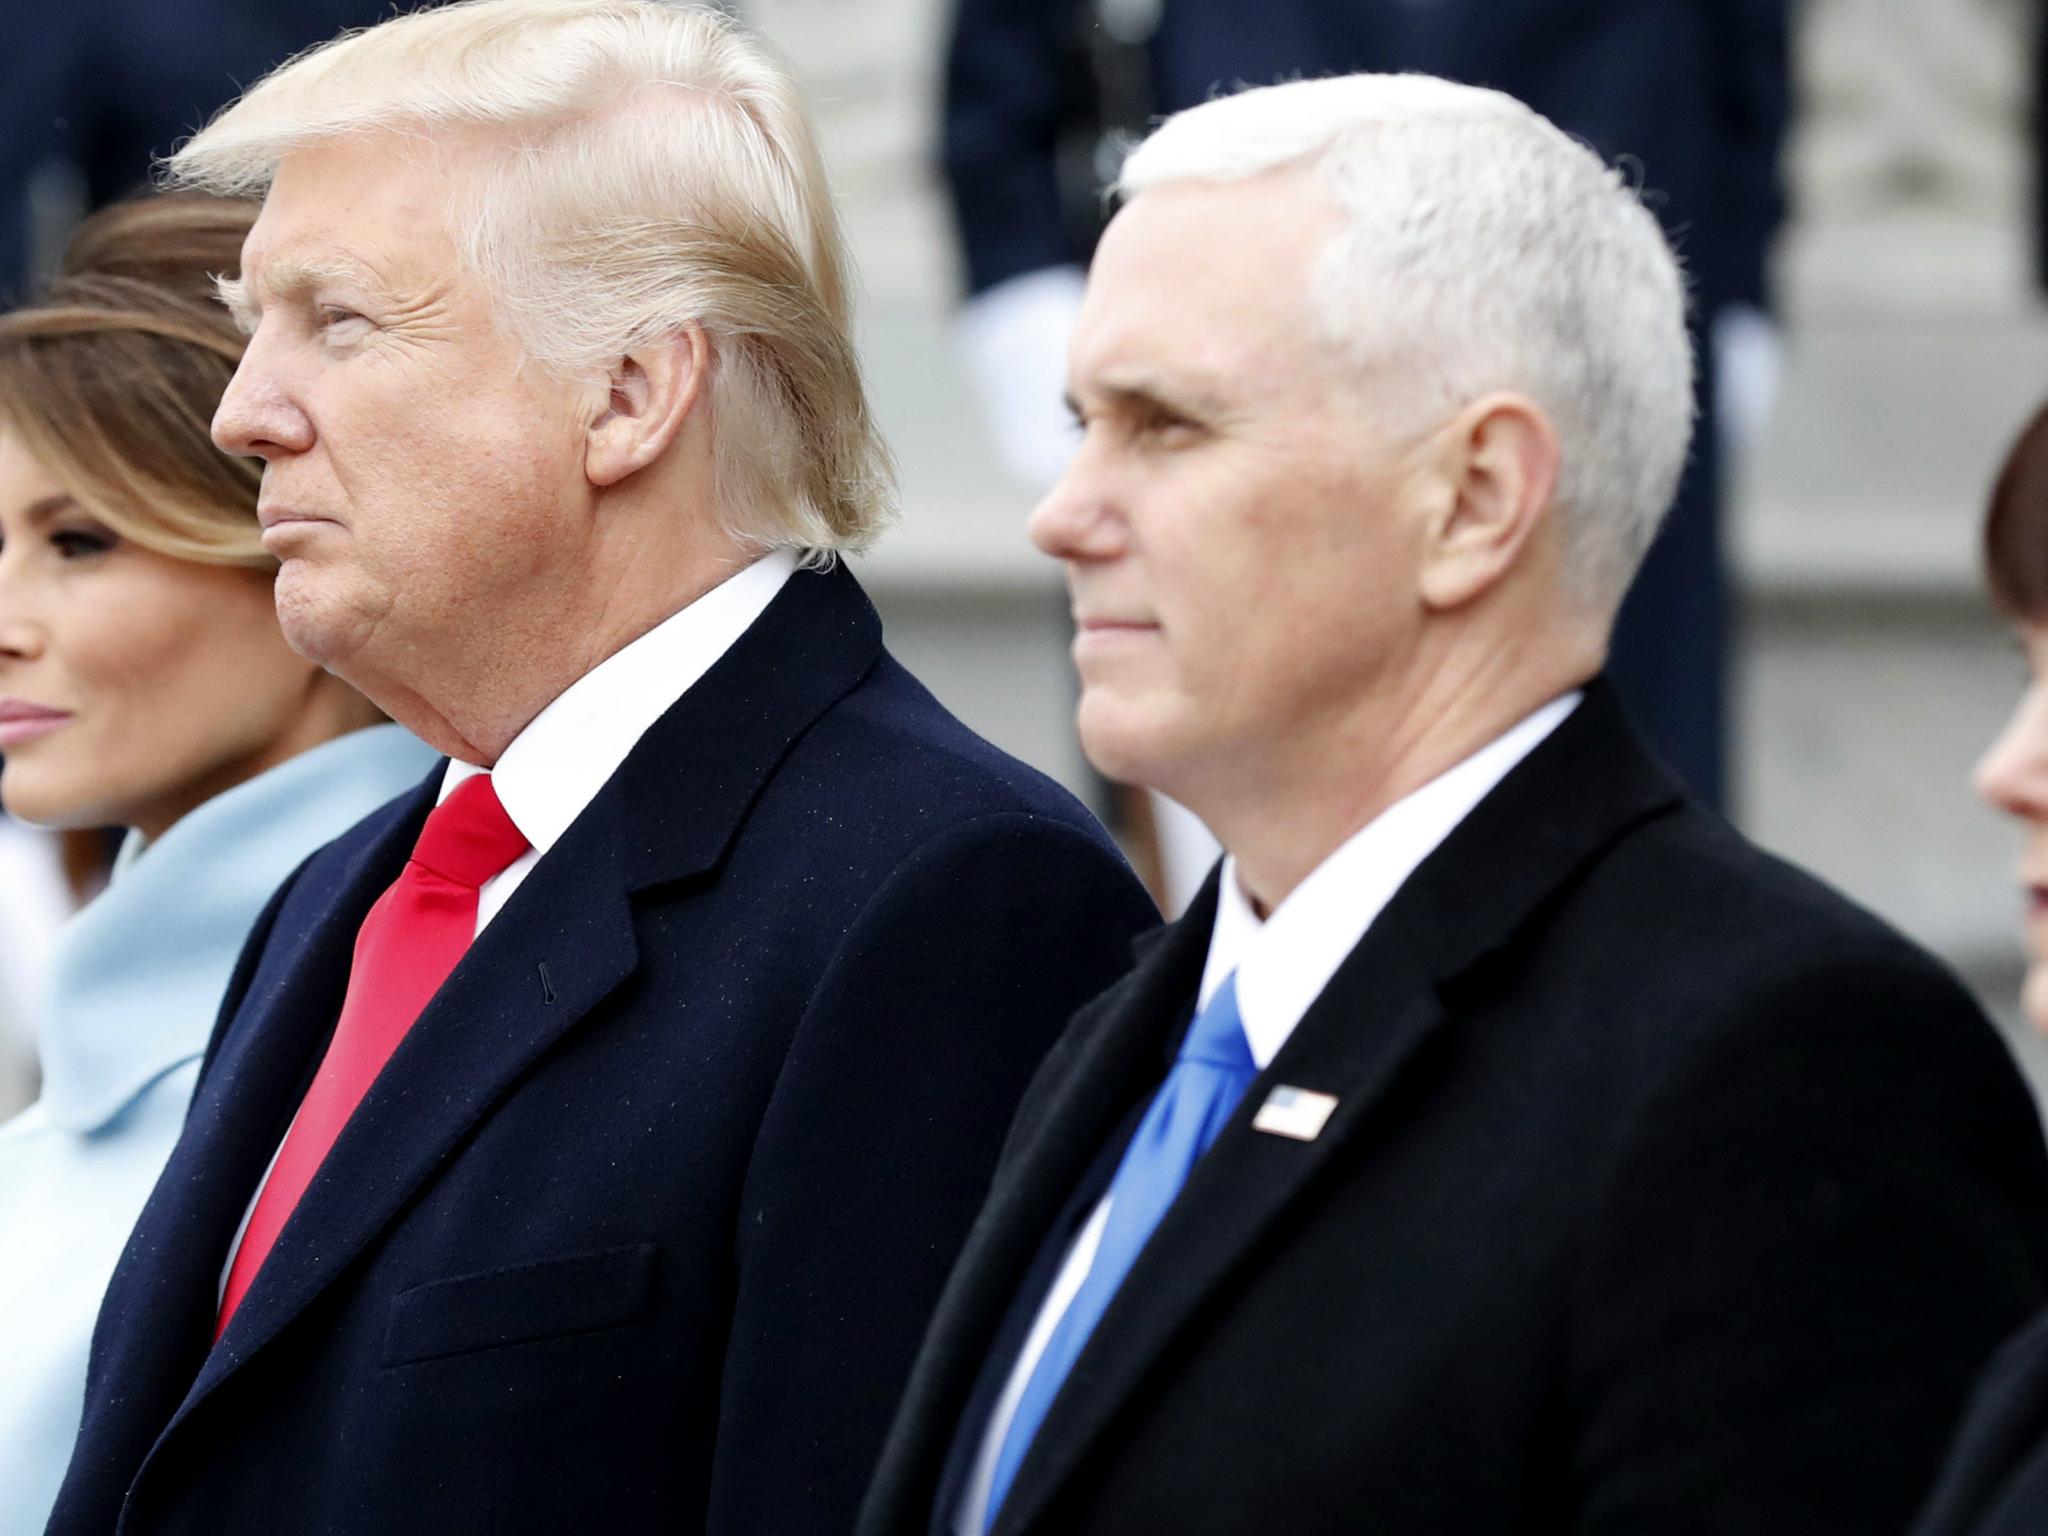 Donald Trump and Vice President Mike Pence during their inauguration ceremony in January 2017, after which the President continued to make claims that millions of illegal votes were cast in the 2016 US election for Hillary Clinton